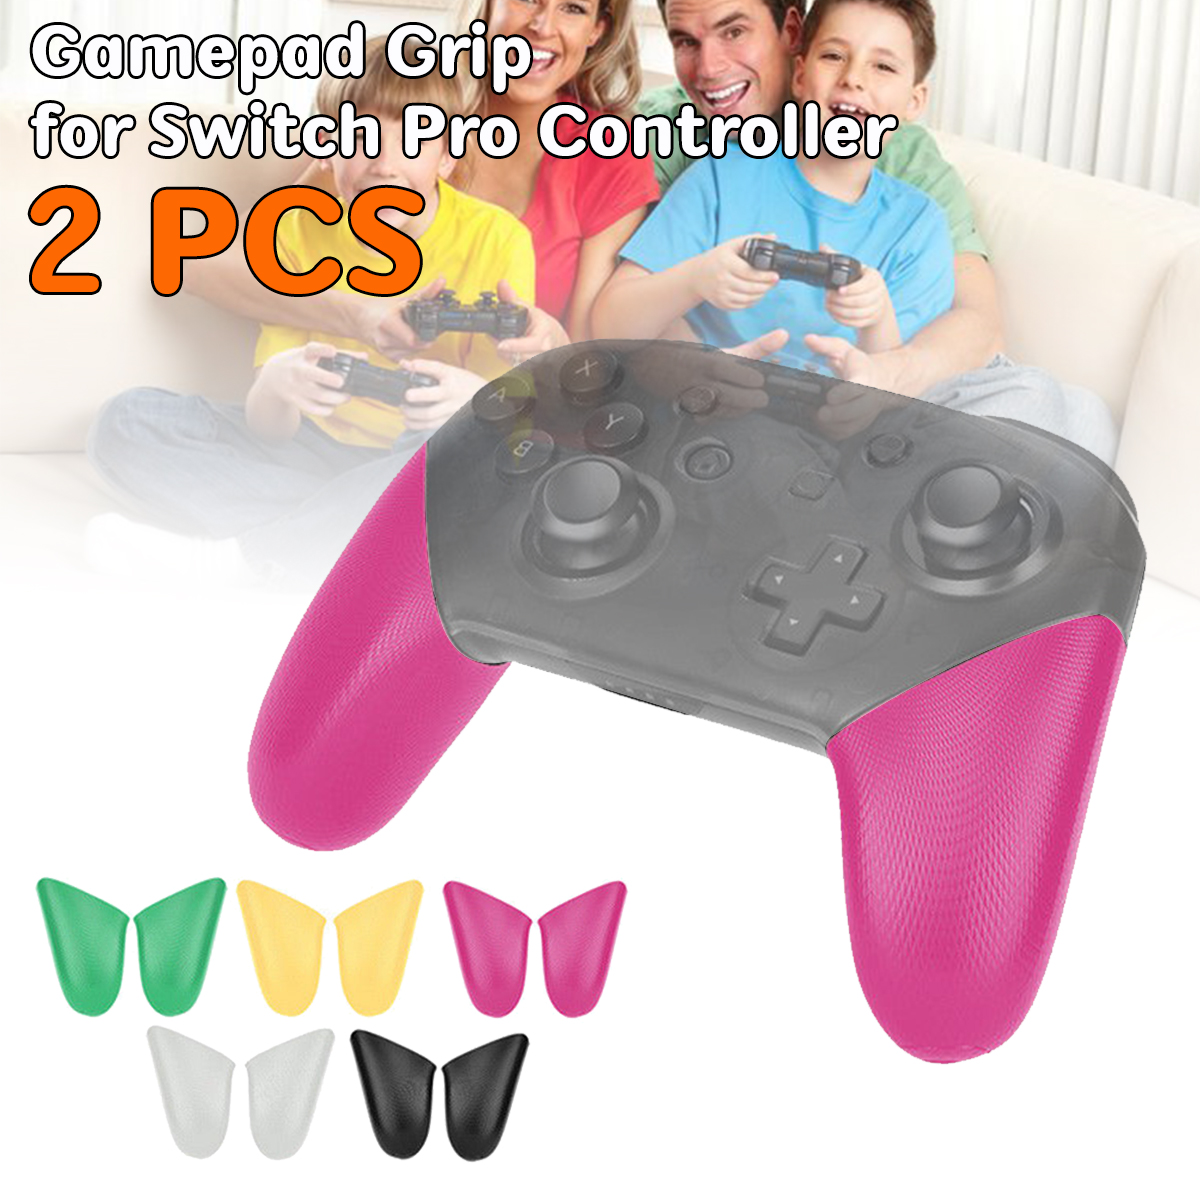 Replacement Grip Handle Protection Solid Shell Skidproof Holder For Nintendo Switch Pro Gamepad Controller 8